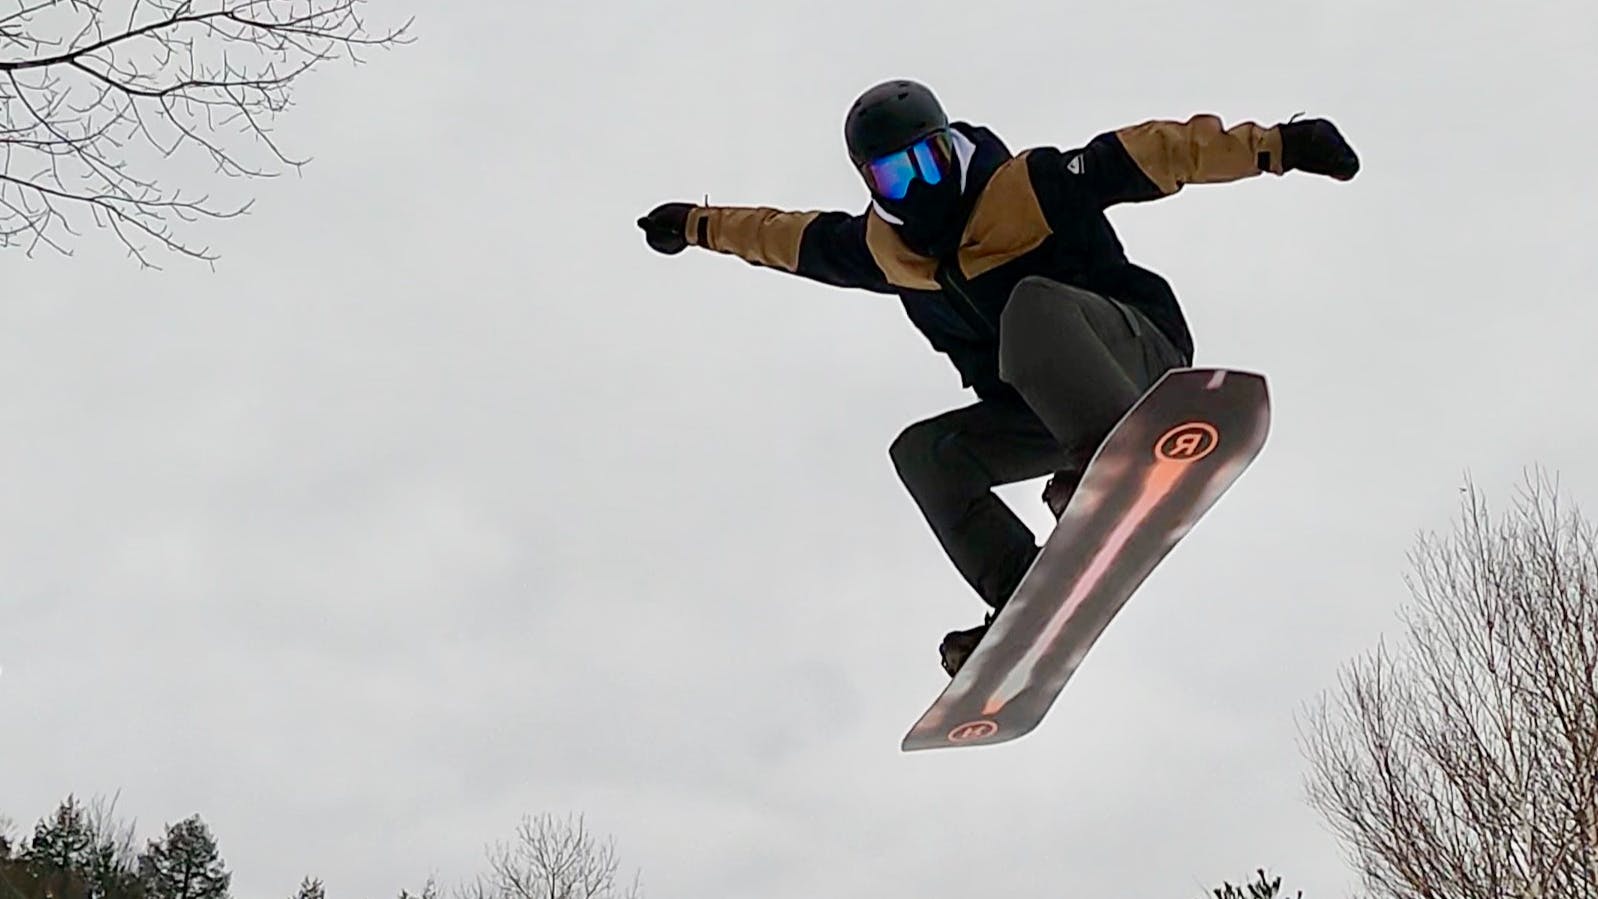 Looking up at a snowboarder flying through the air